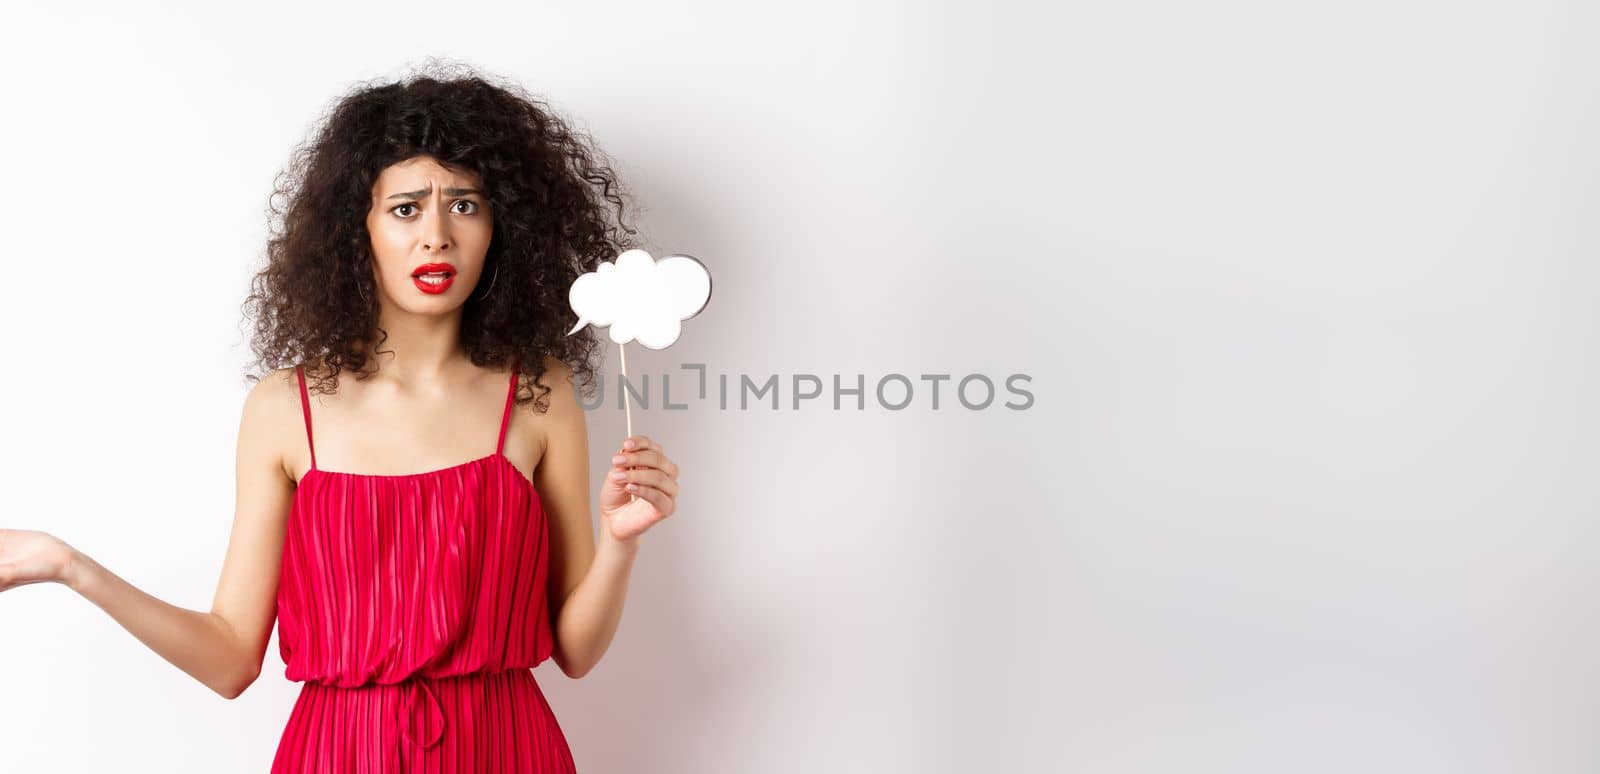 Confused young woman in red dress, frowning and looking upset, holding comment cloud stick, standing against white background.